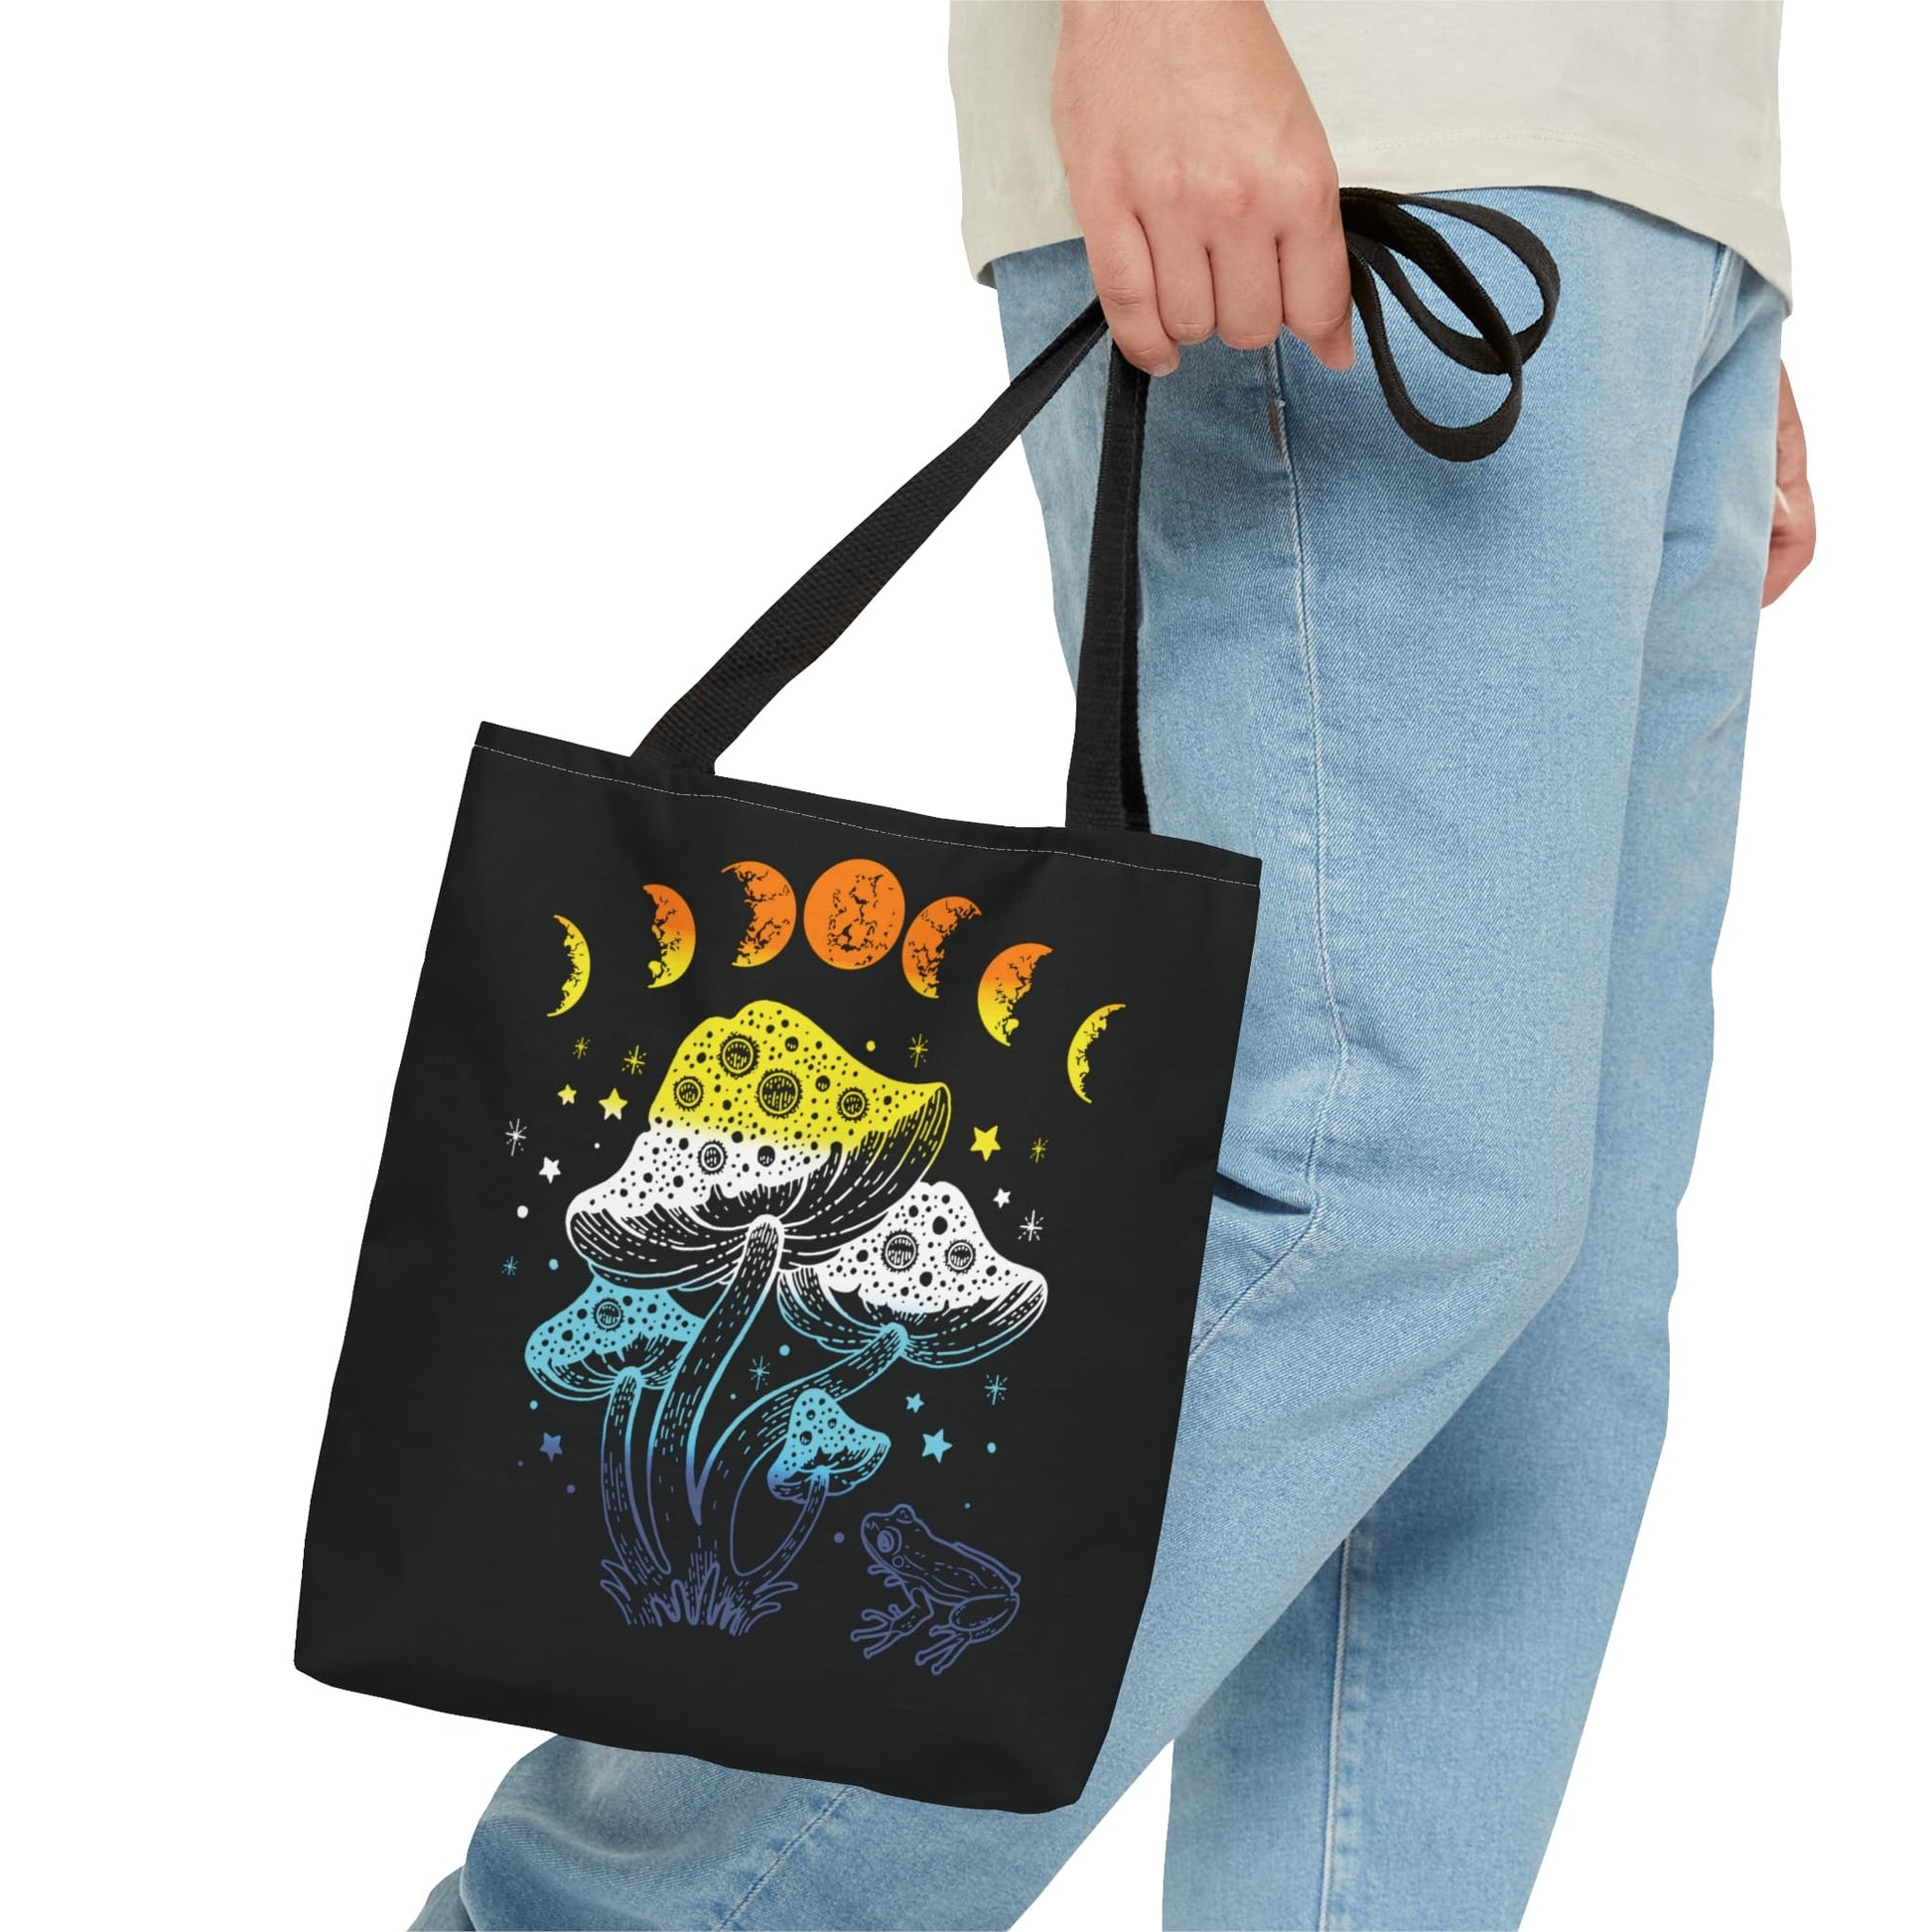 aroace tote bag, goblincore mushrooms frog and moon phases aro ace pride bag, small